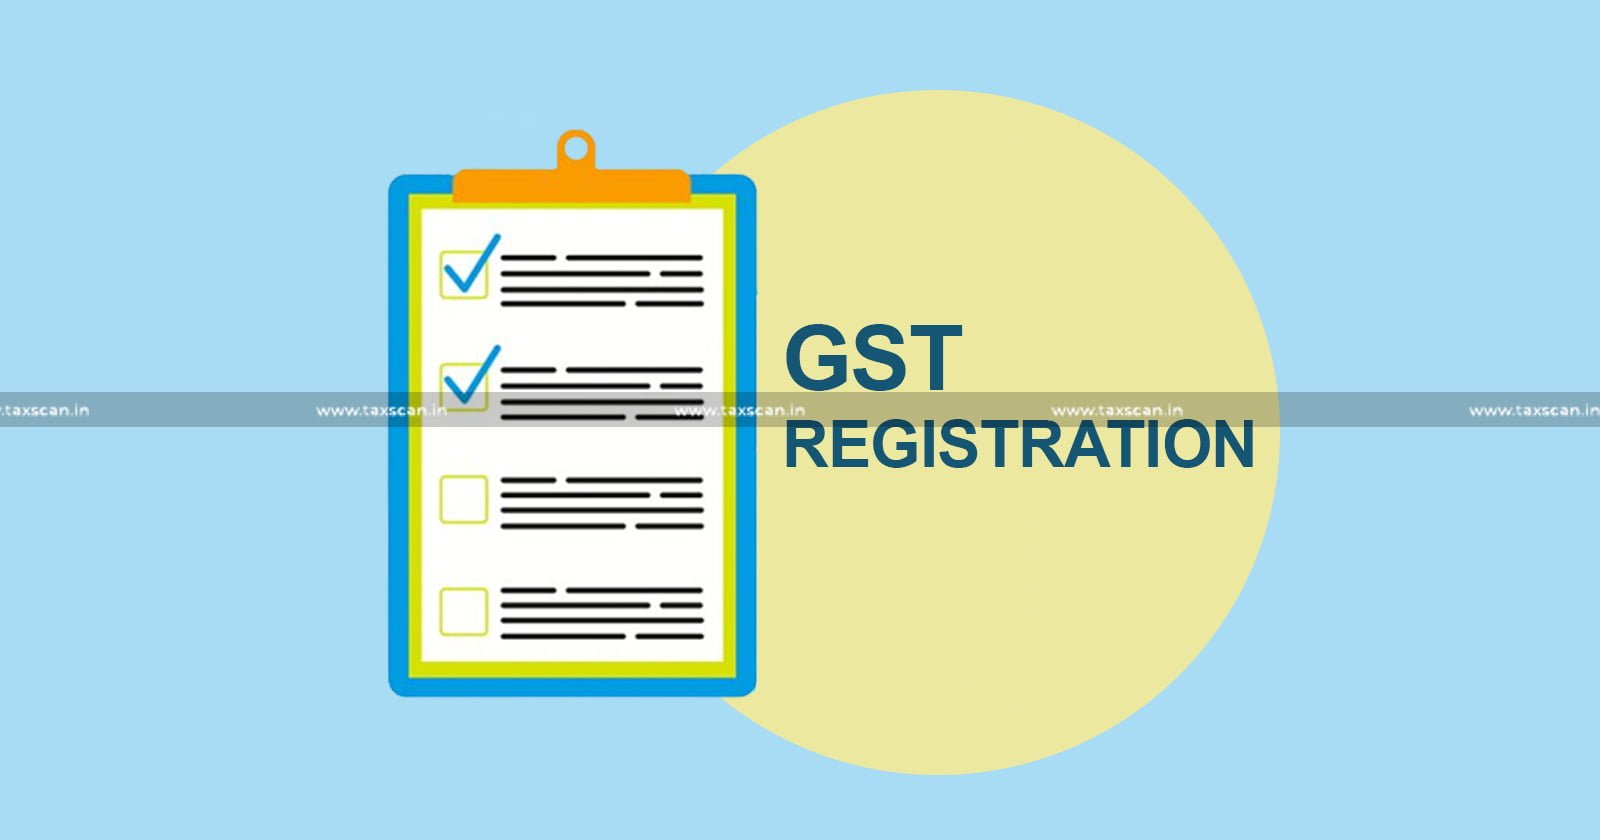 Kerala HC quashes Cancellation of GST Registration - Cancellation of GST Registration - GST Registration - GST - Absence of Reasonable Opportunity of Being Heard - taxscan